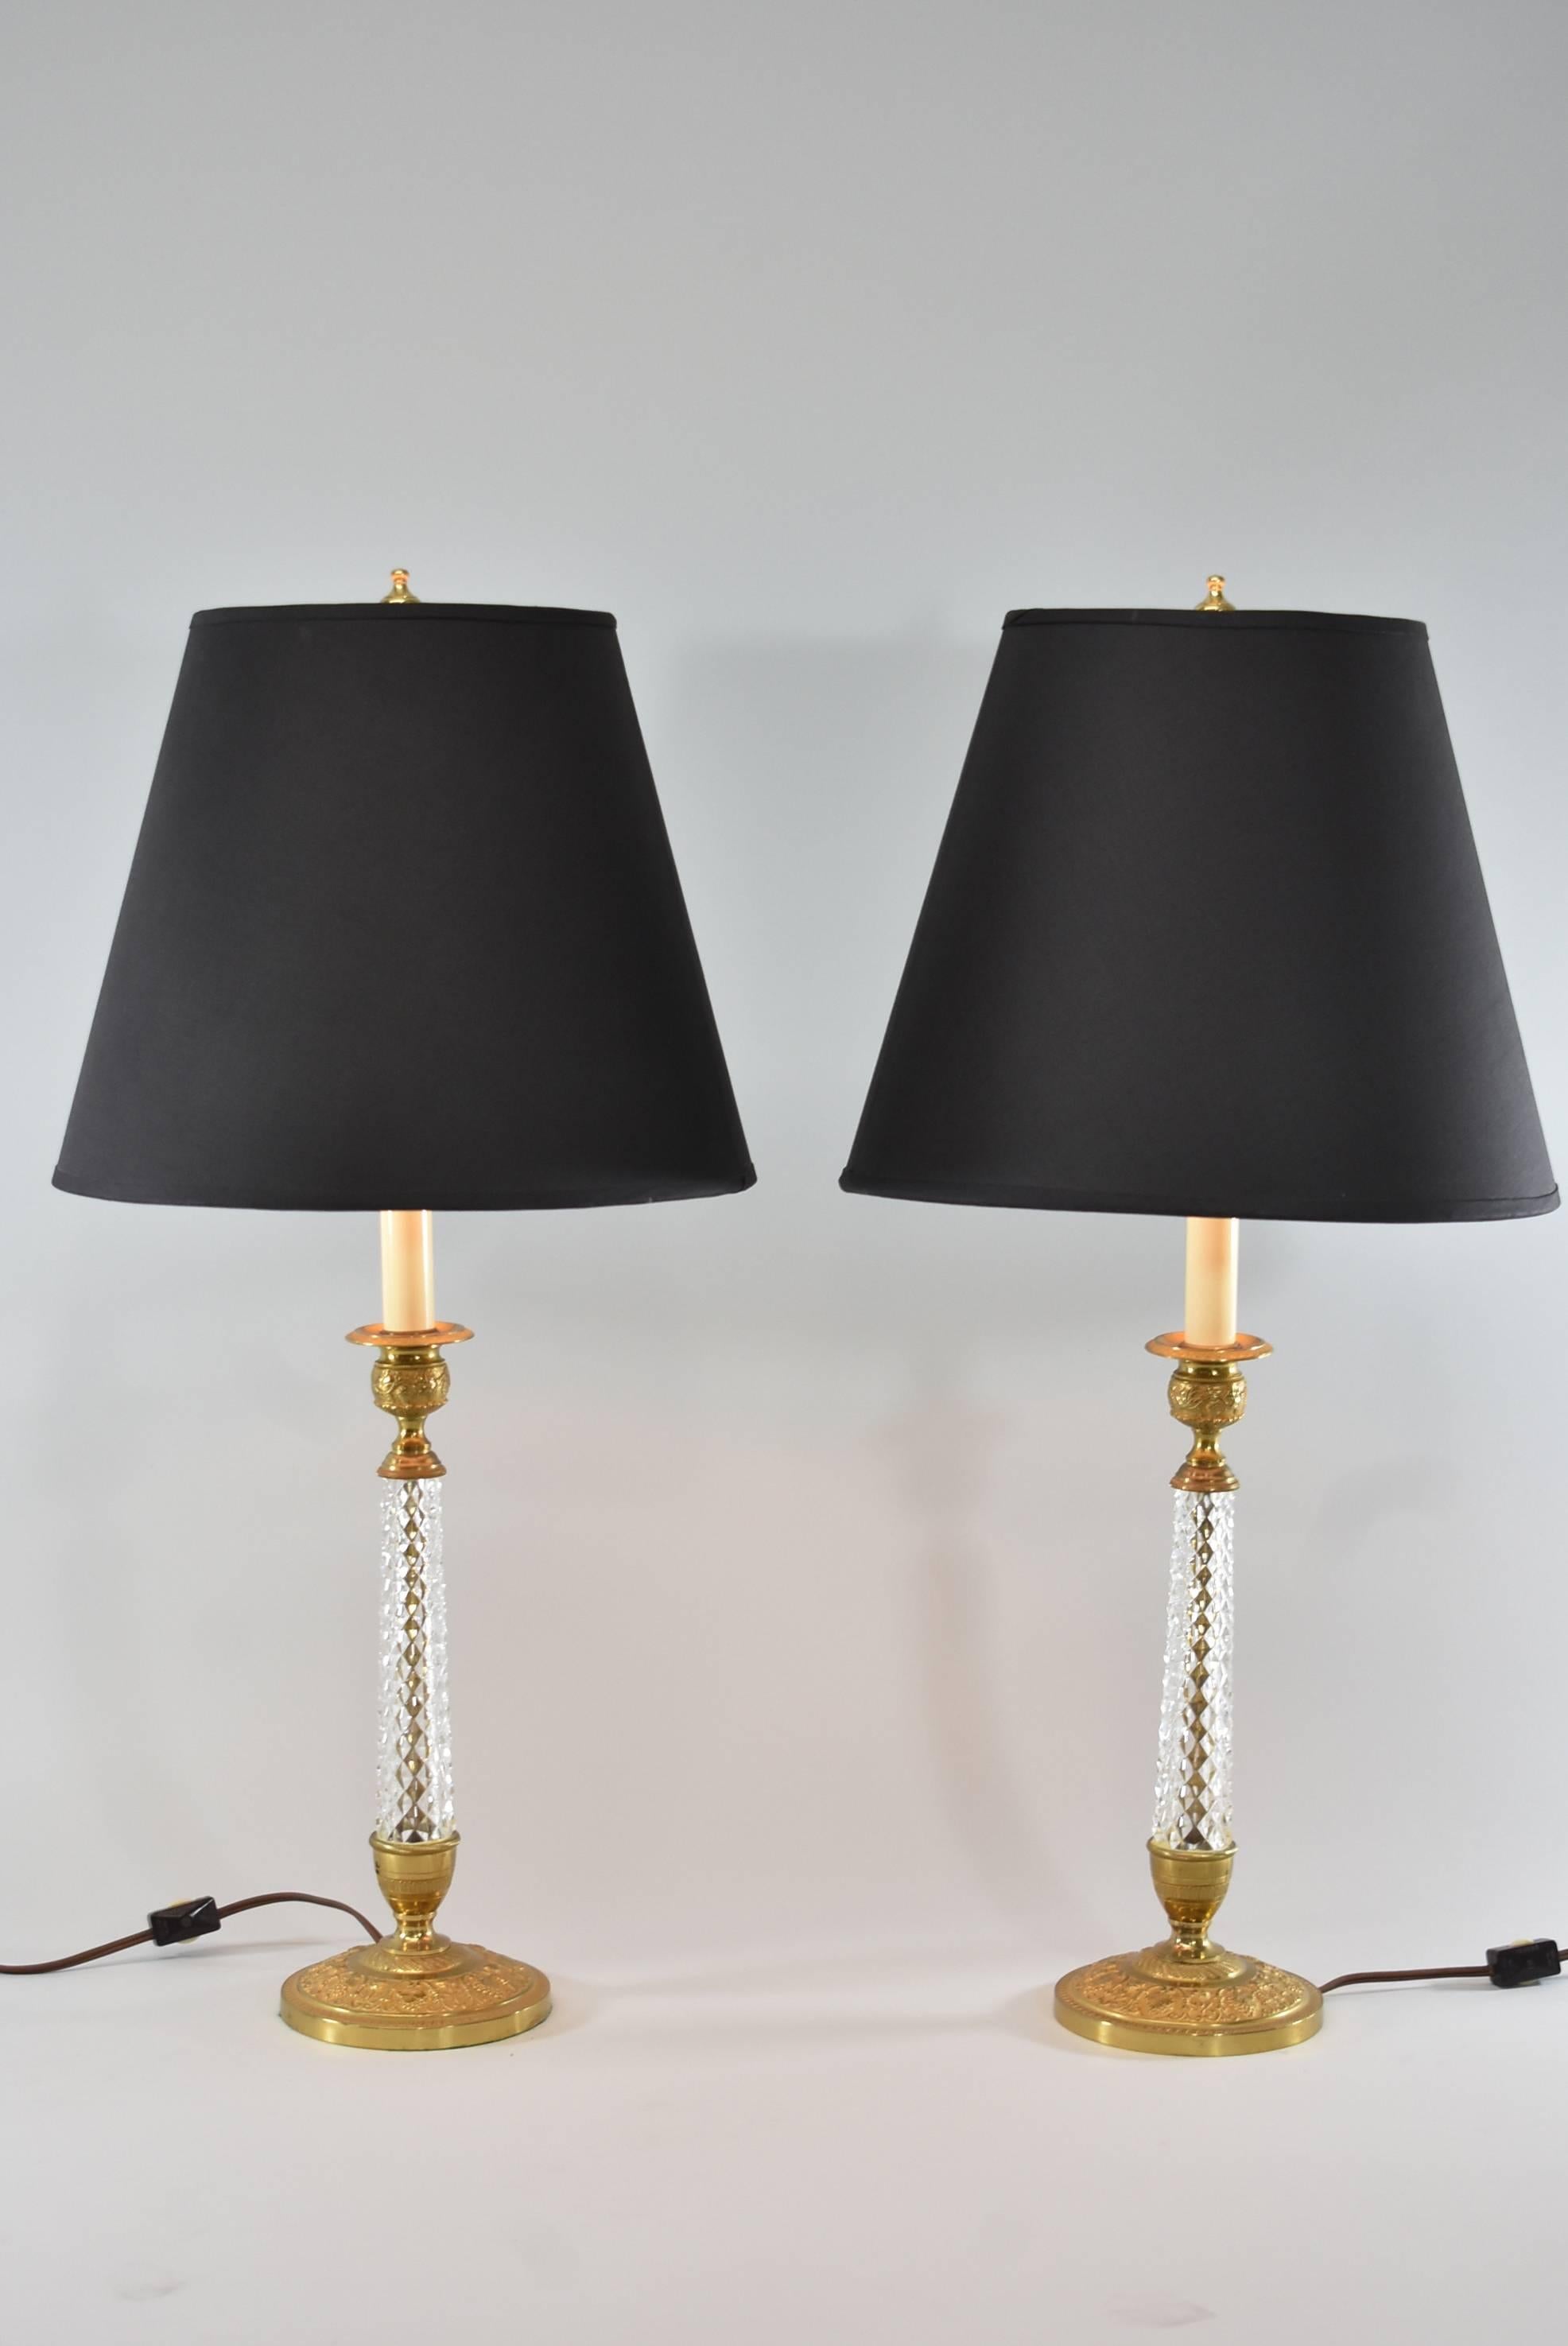 A stunning pair of boudoir lamps. They feature a gold doré finish with grapes and vines and beautiful cut-glass in a candlestick form. They each have a single socket. The shades are not included.